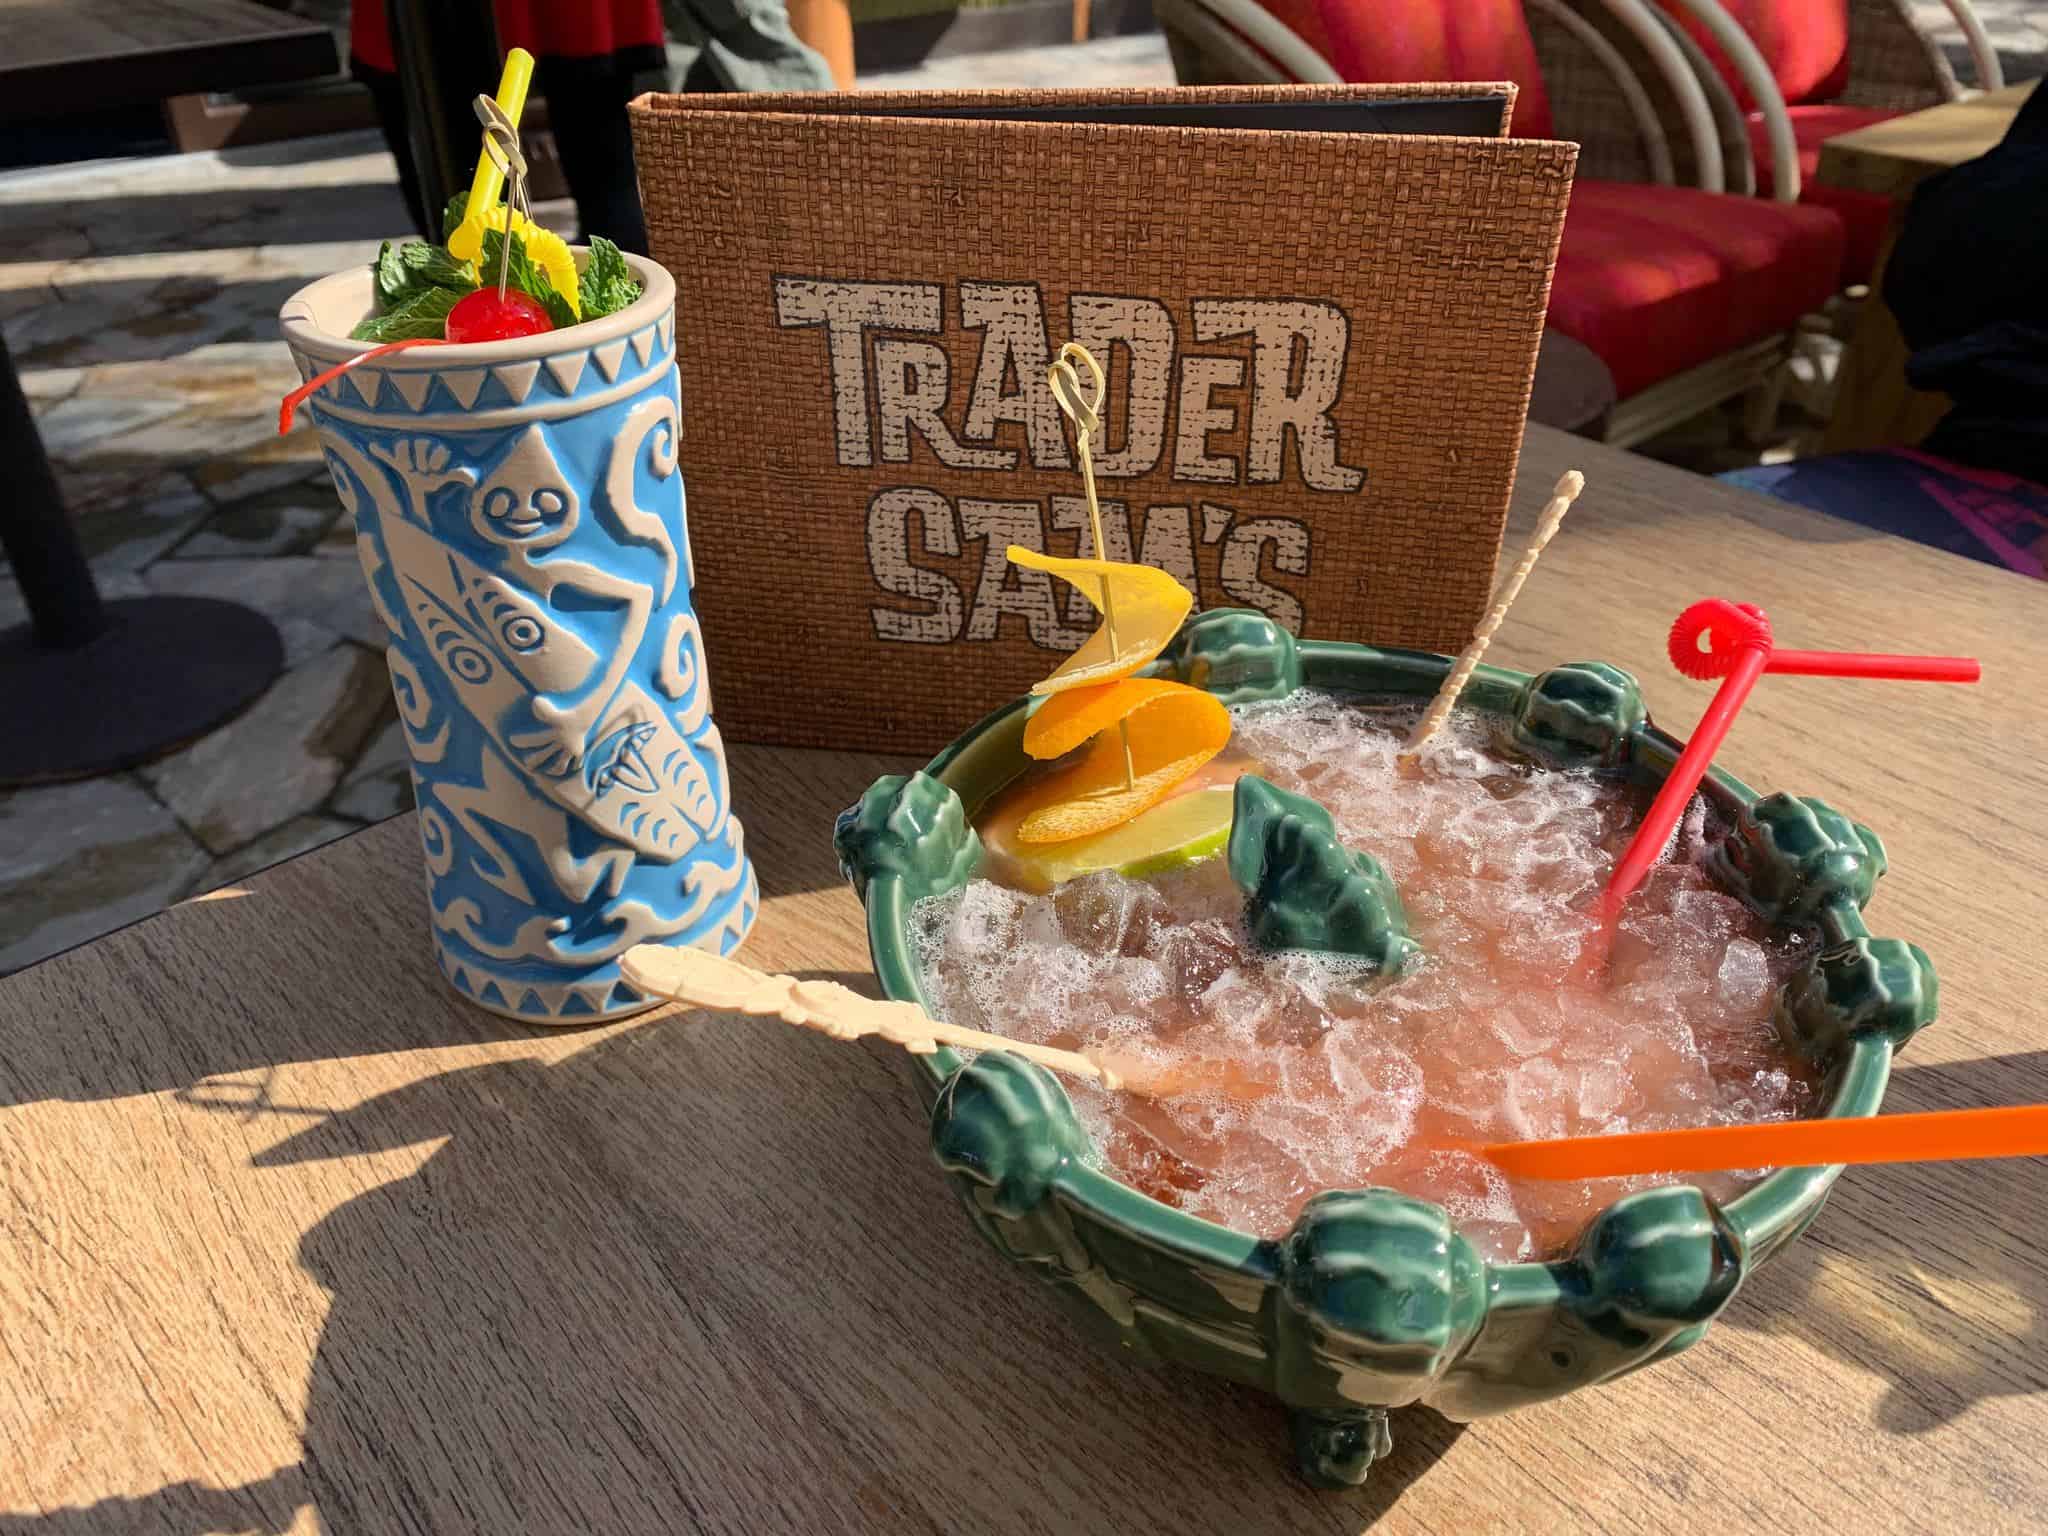 Photos Review New Drinks 4 New Souvenir Mugs Released At Trader Sam S Enchanted Tiki Bar Disneyland Hotel Wdw News Today,Freeze Mushrooms Whole Or Sliced